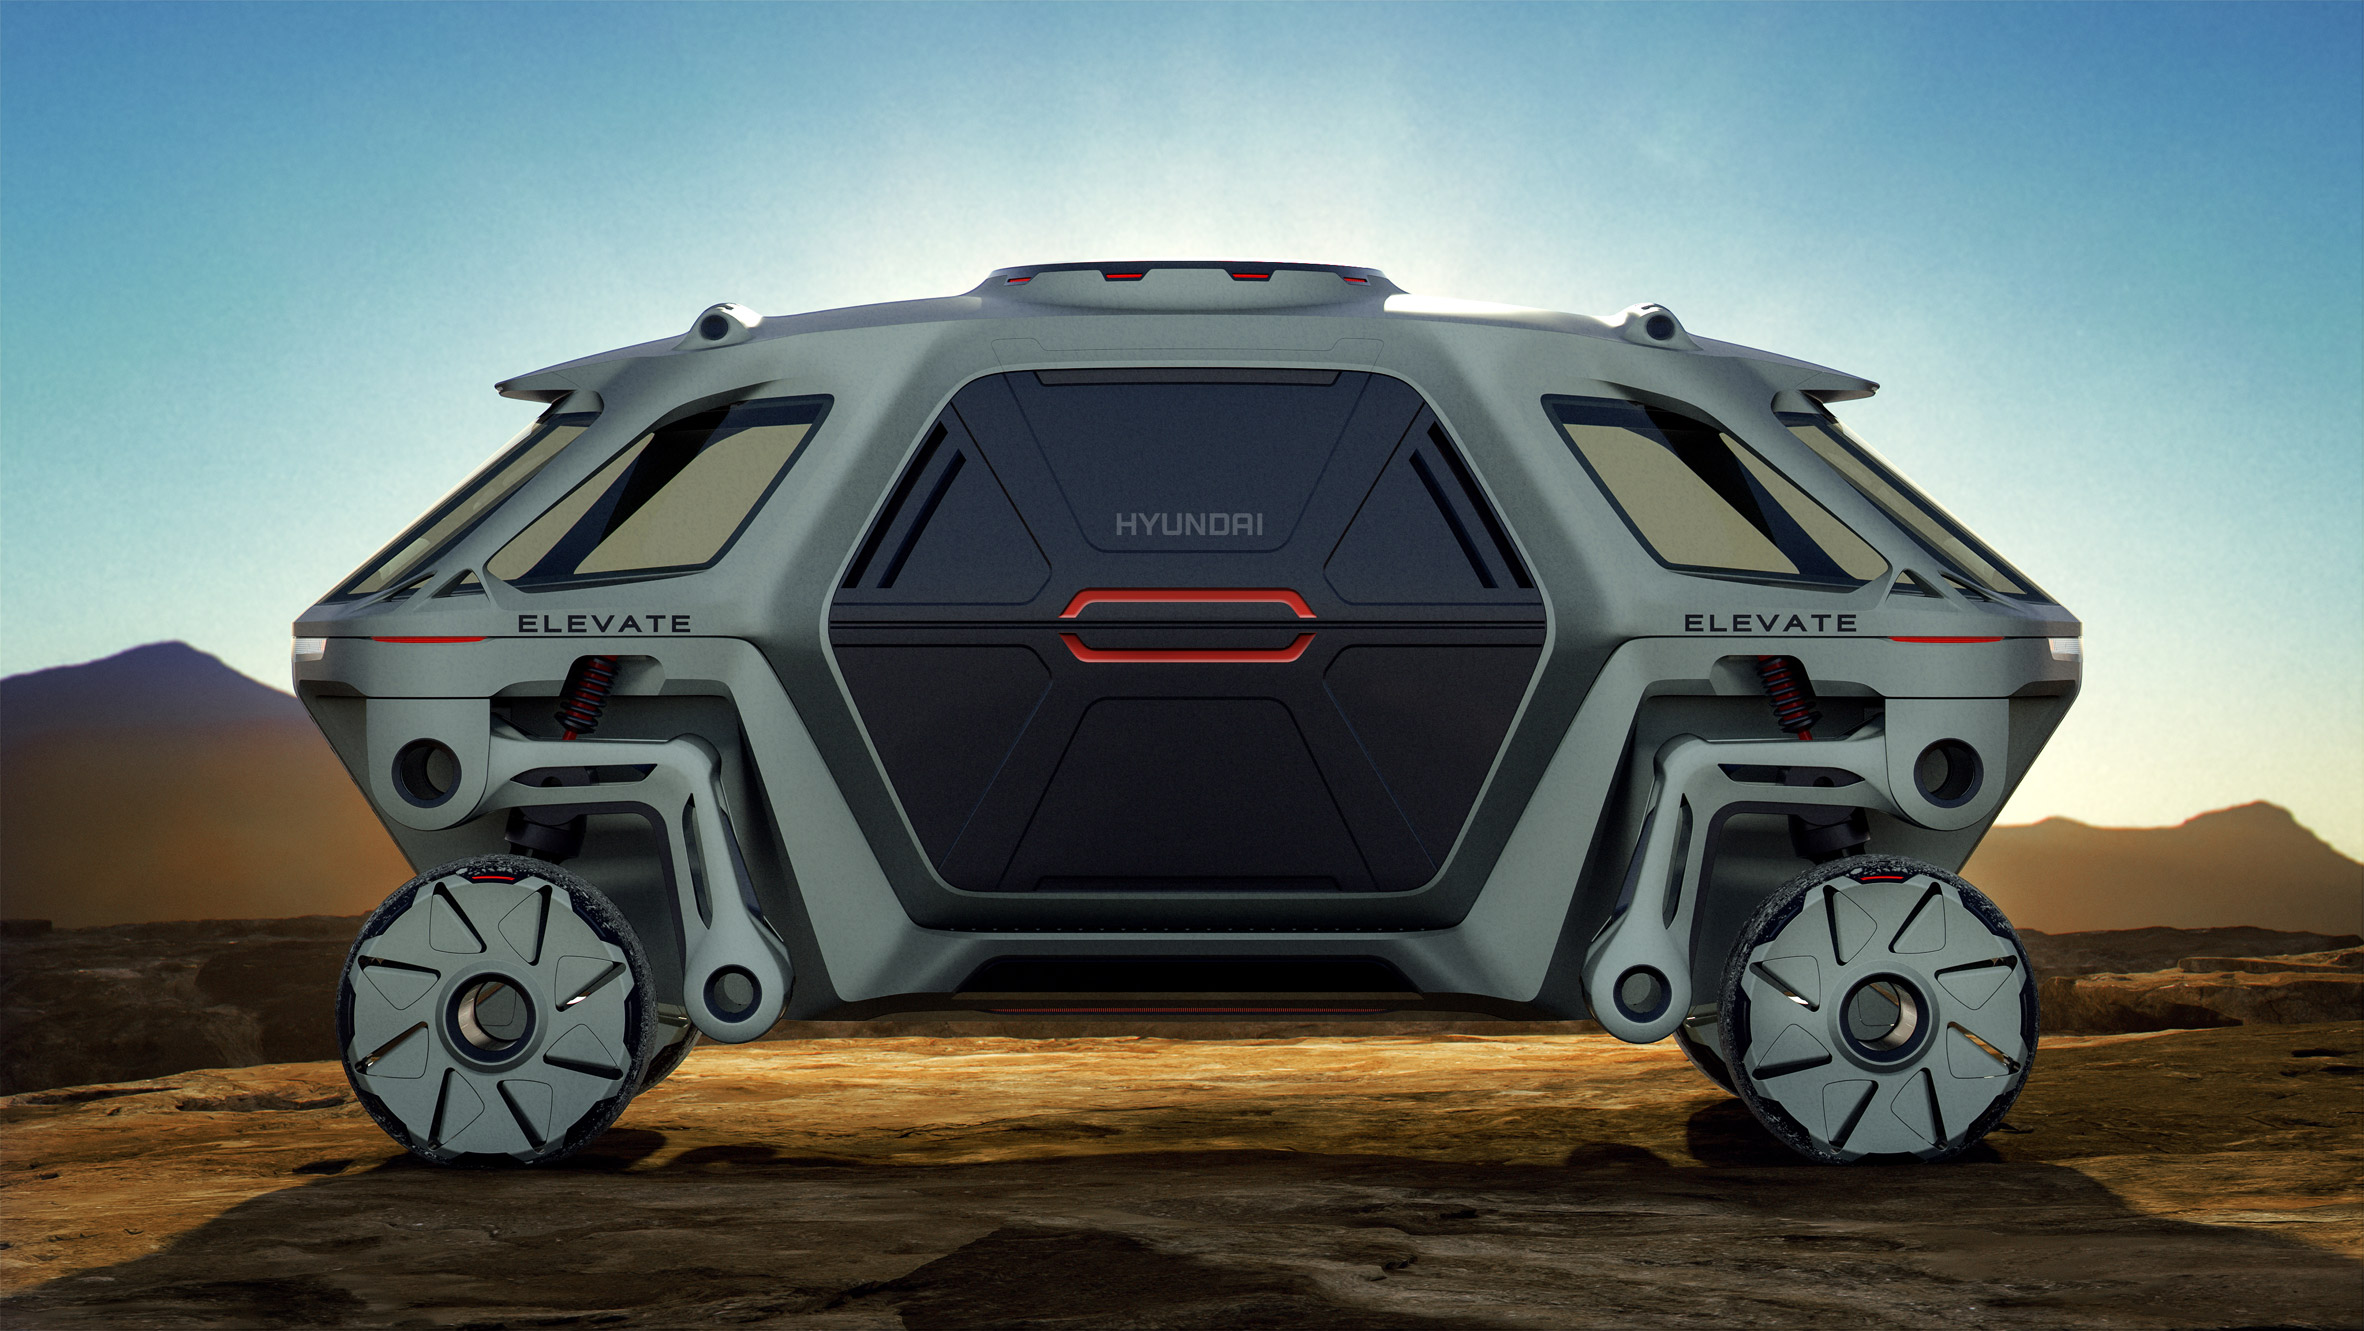 Hyundai unveils walking car concept at CES 2019 that could be the first responder in natural disasters